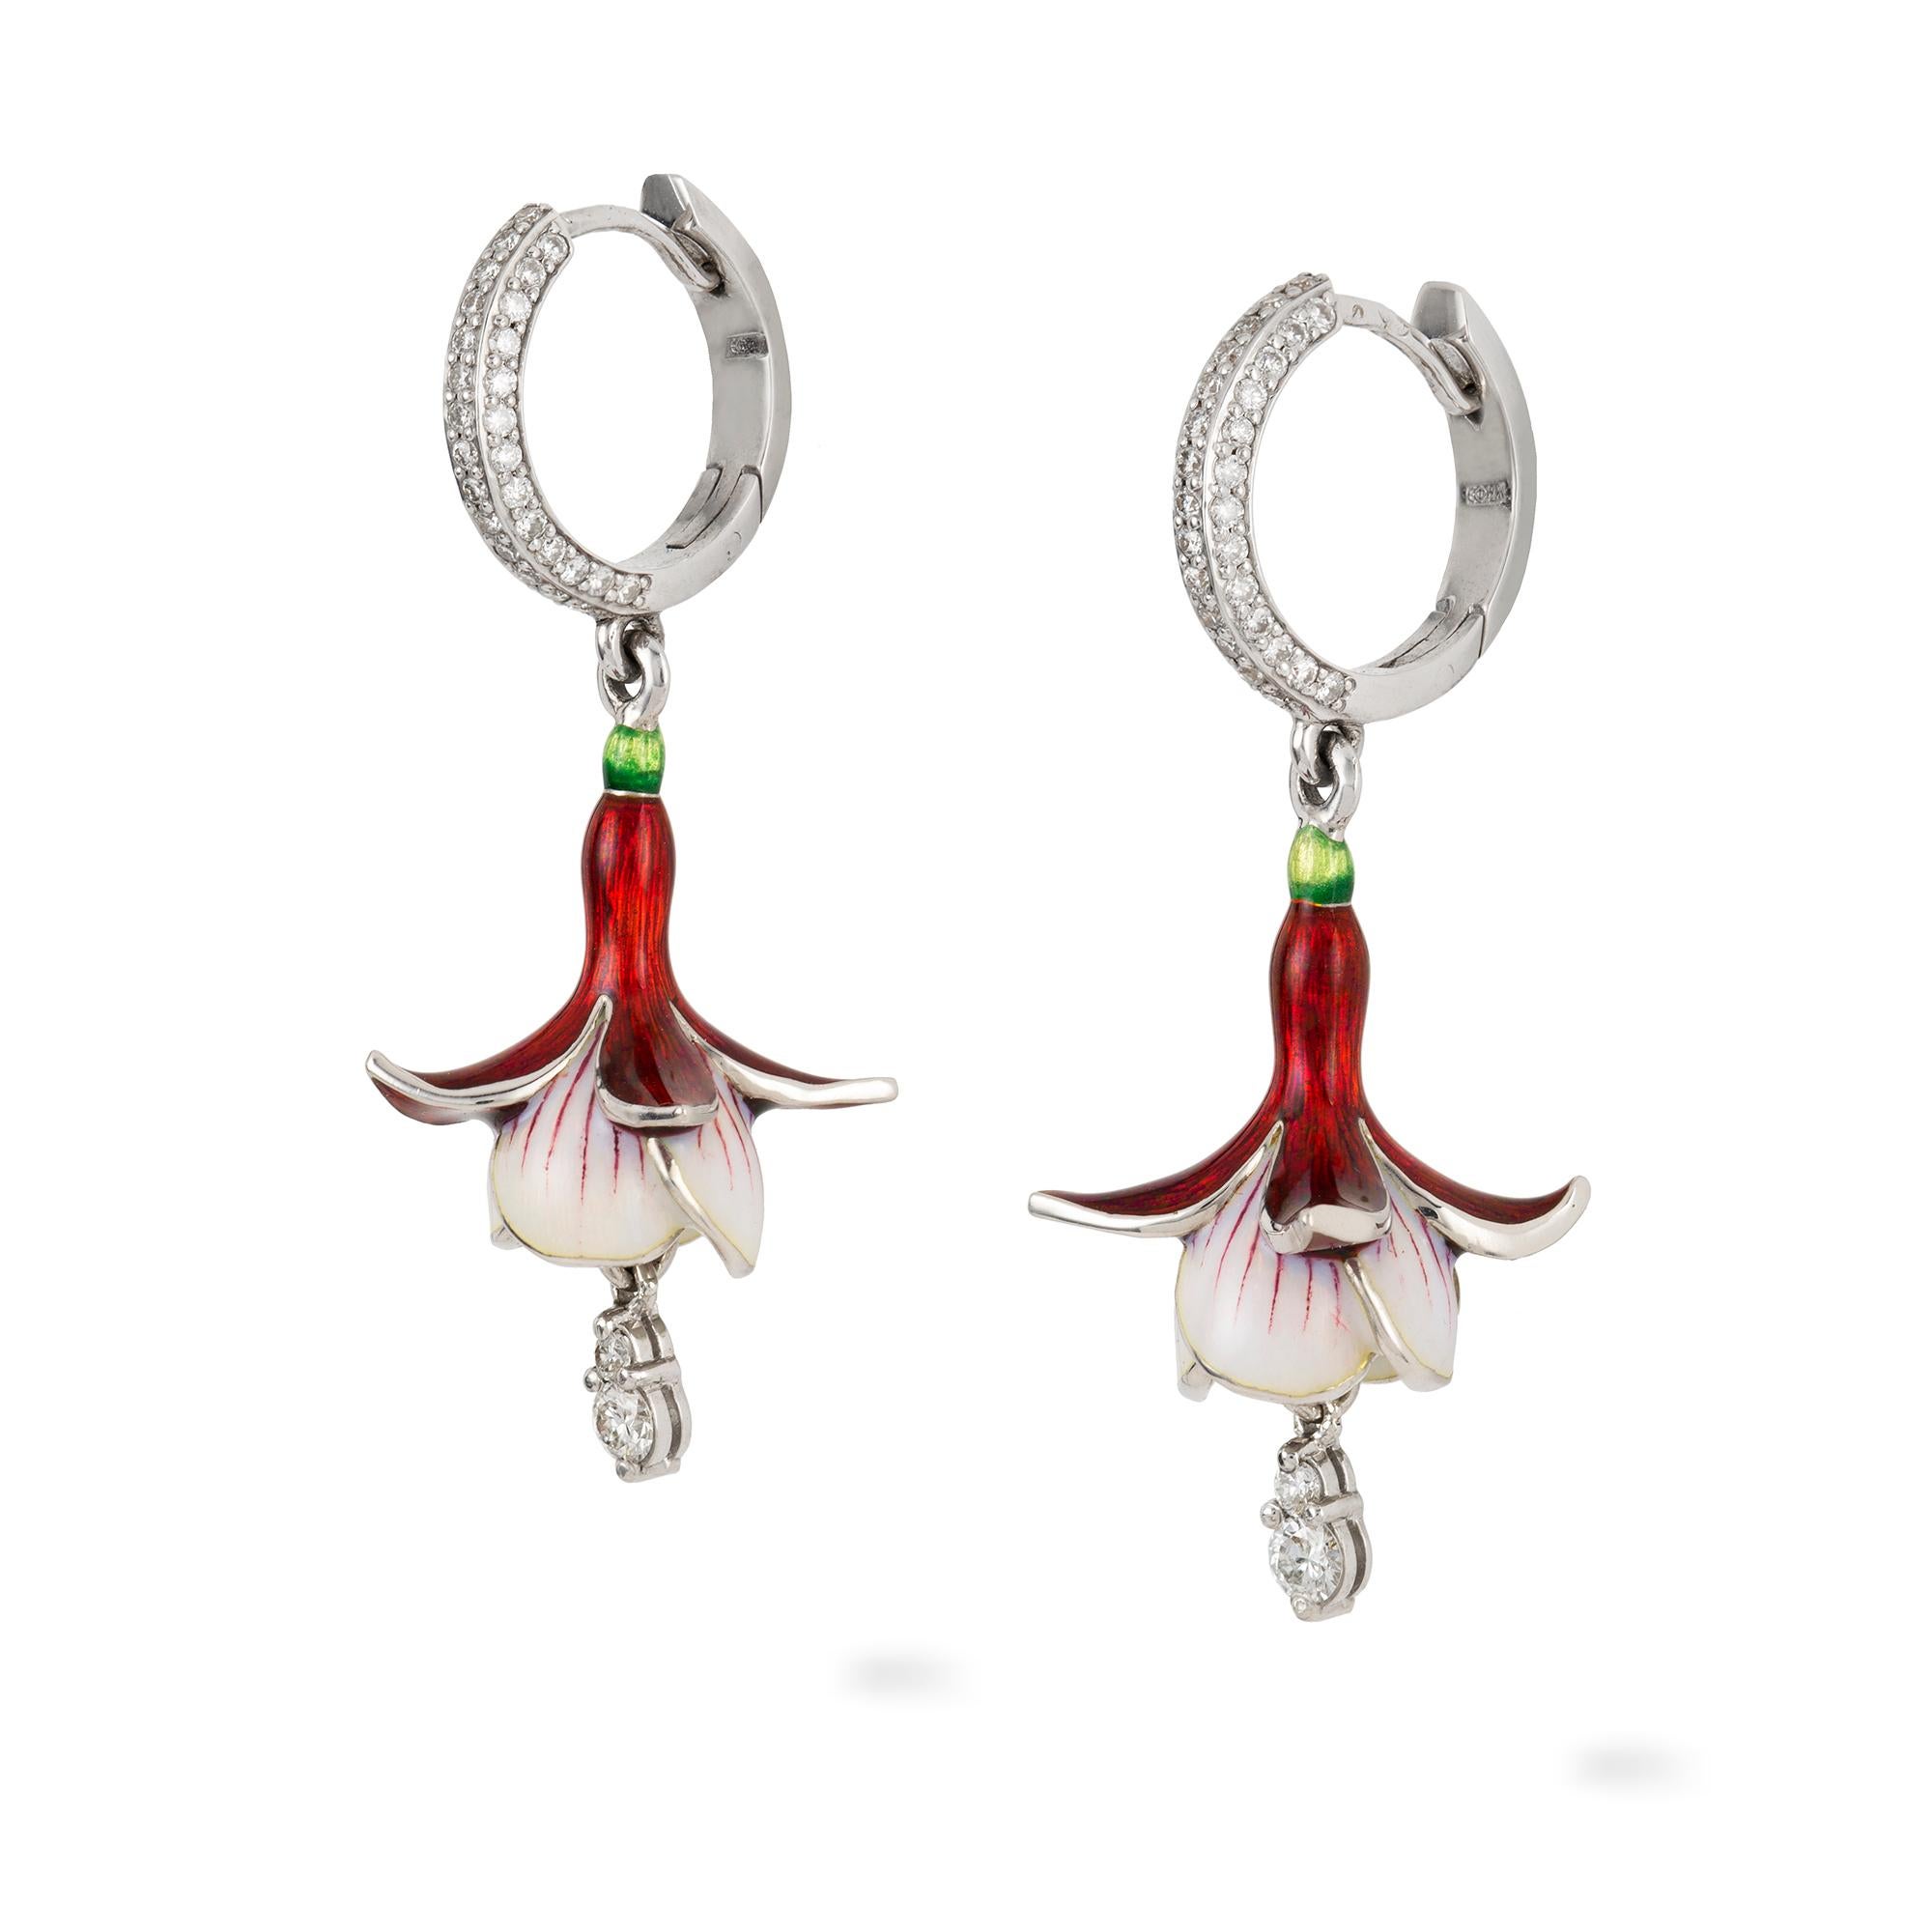 A pair of fuchsia earrings by Ilgiz F, each with a diamond-set hoop suspending a realistically carved champlevé enamelled fuchsia, with a diamond-set drop, the diamonds weighing 0.67 carats in total, all in white gold mount made by Ilgiz